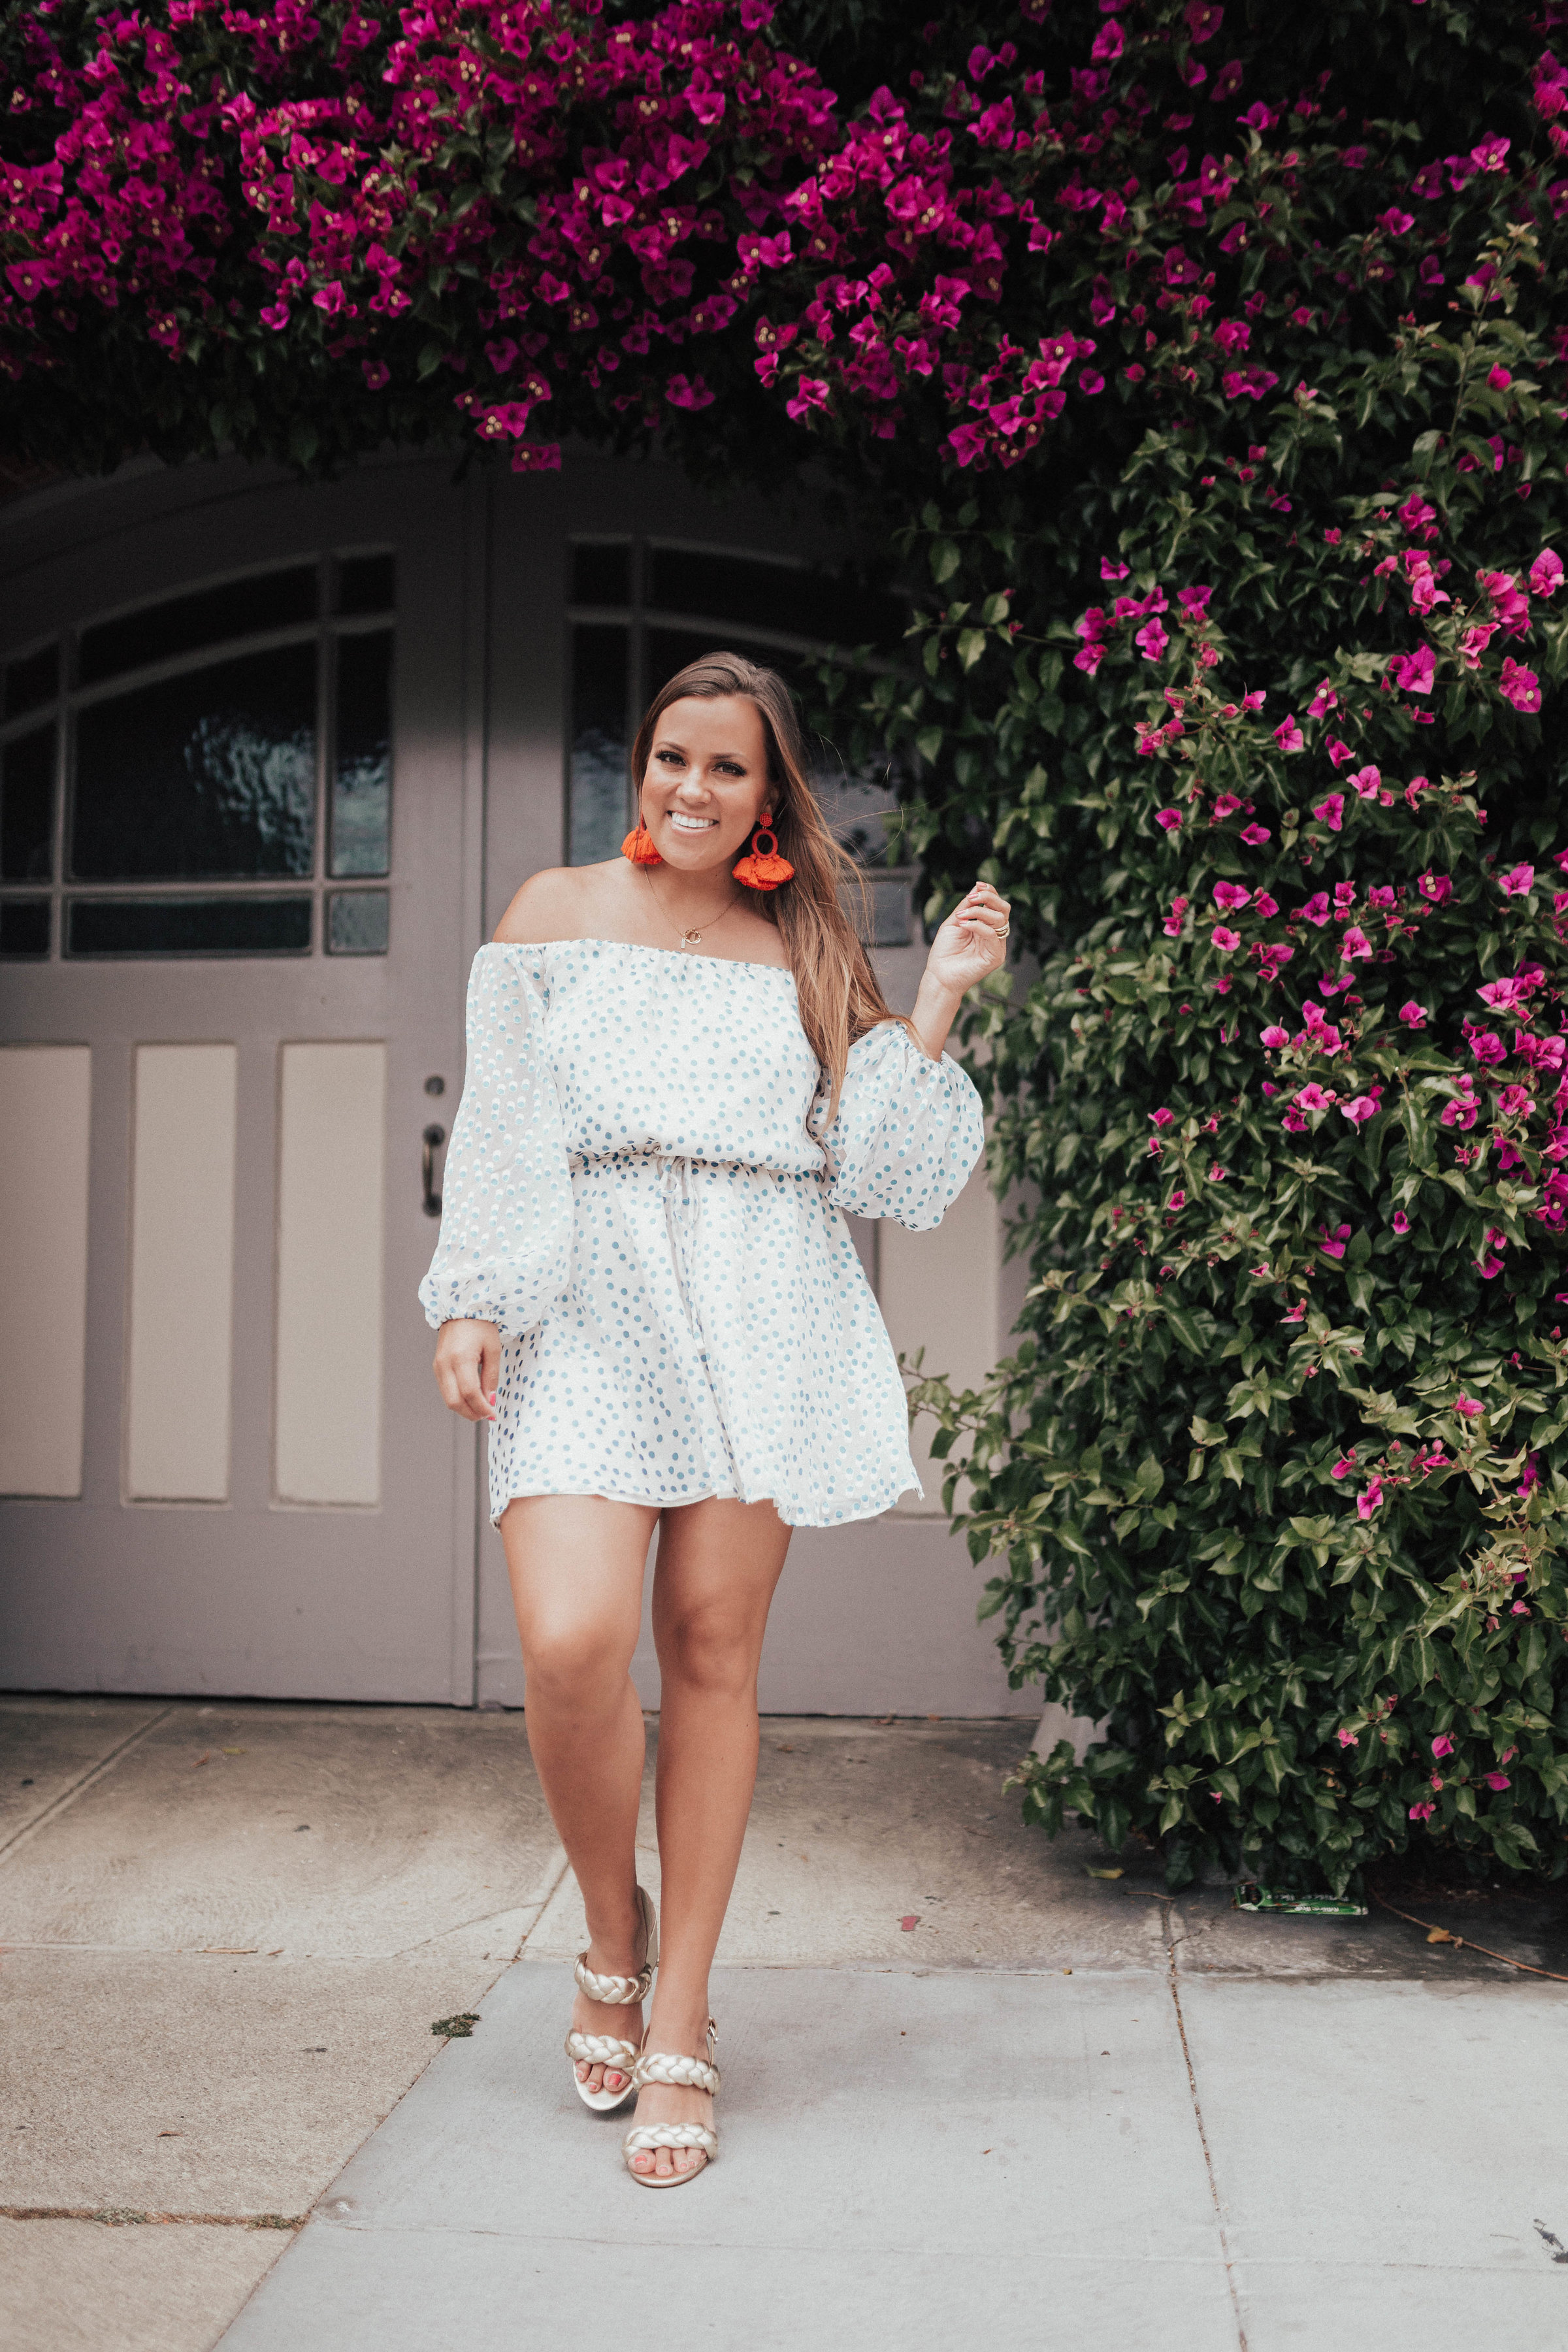 Ashley Zeal from Two Peas in a Prada shares their June Top Ten sellers featuring their best selling items from the month of June including this polka dot dress!